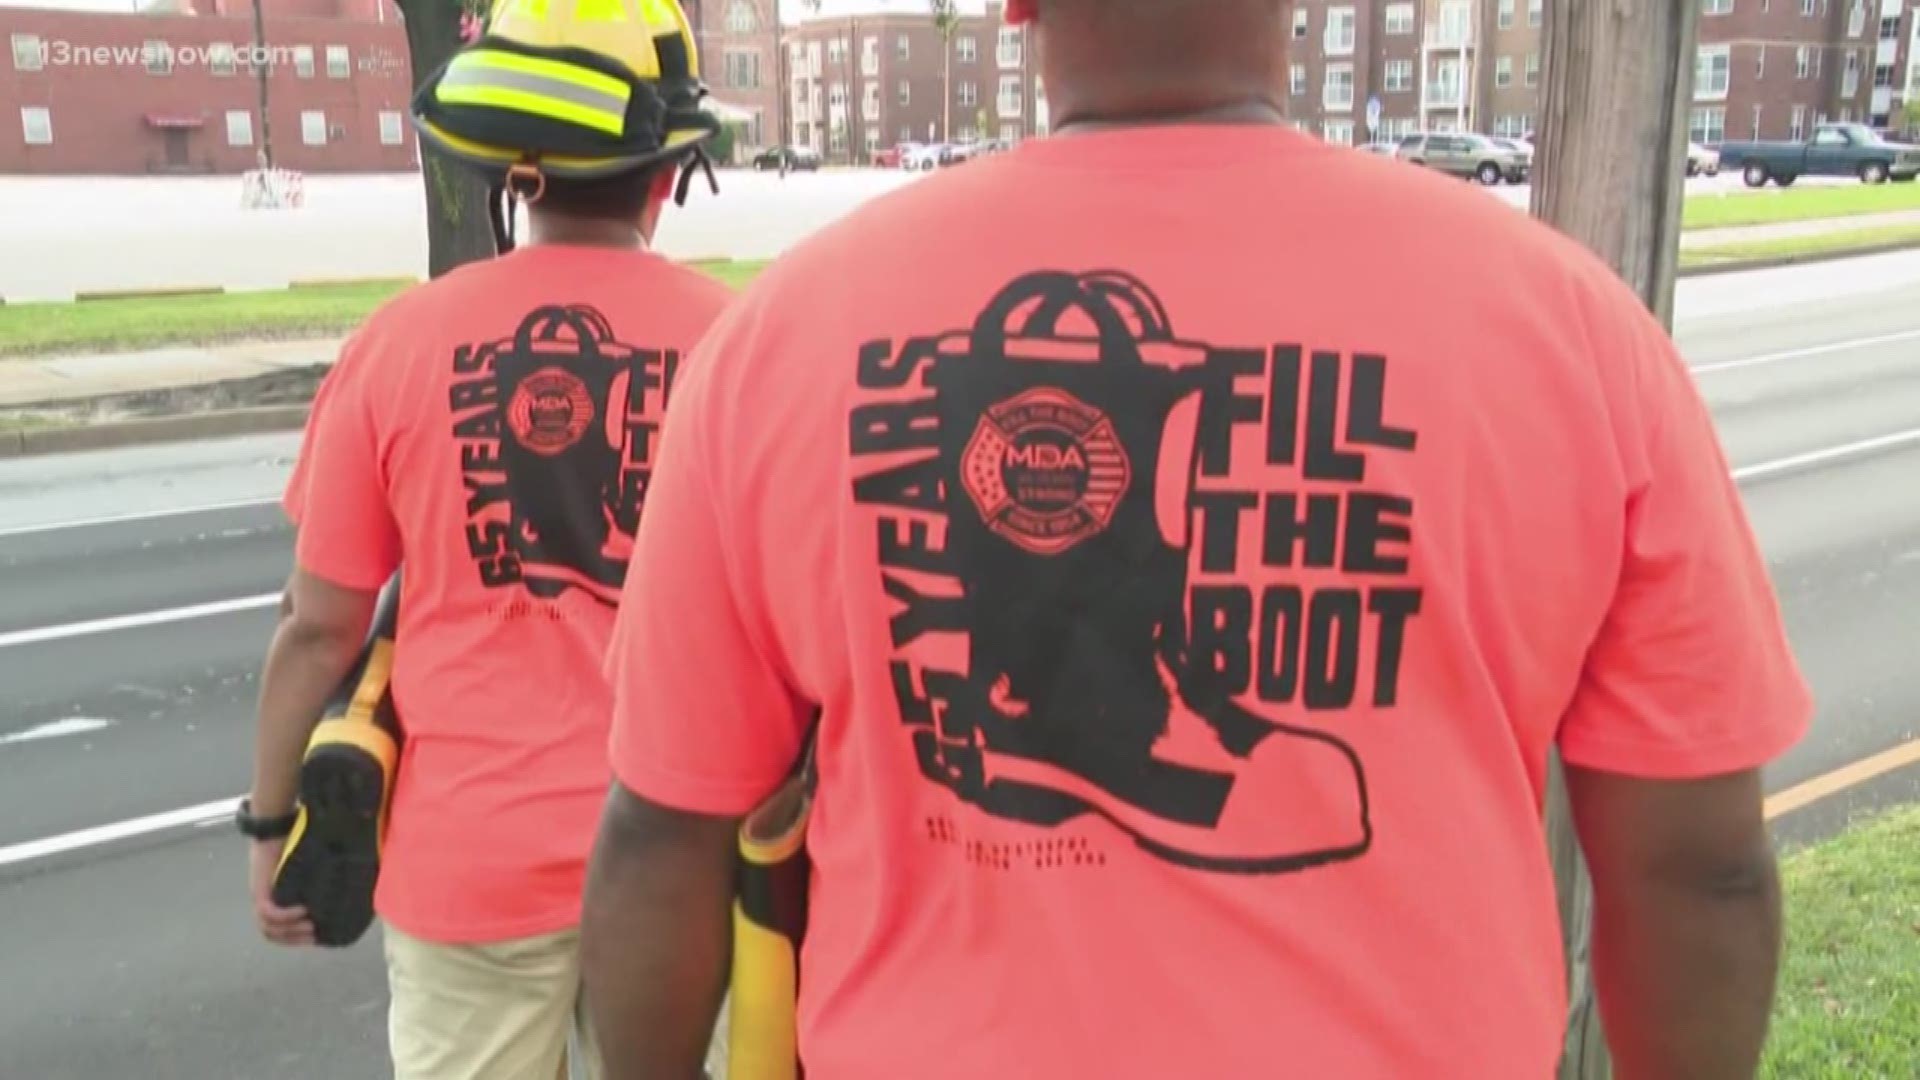 Firefighters in Norfolk are hitting the streets for their annual "Fill the Boot" campaign. Norfolk fire-rescue is collecting money for the Muscular Dystrophy Association. All of the money they raise stays local.